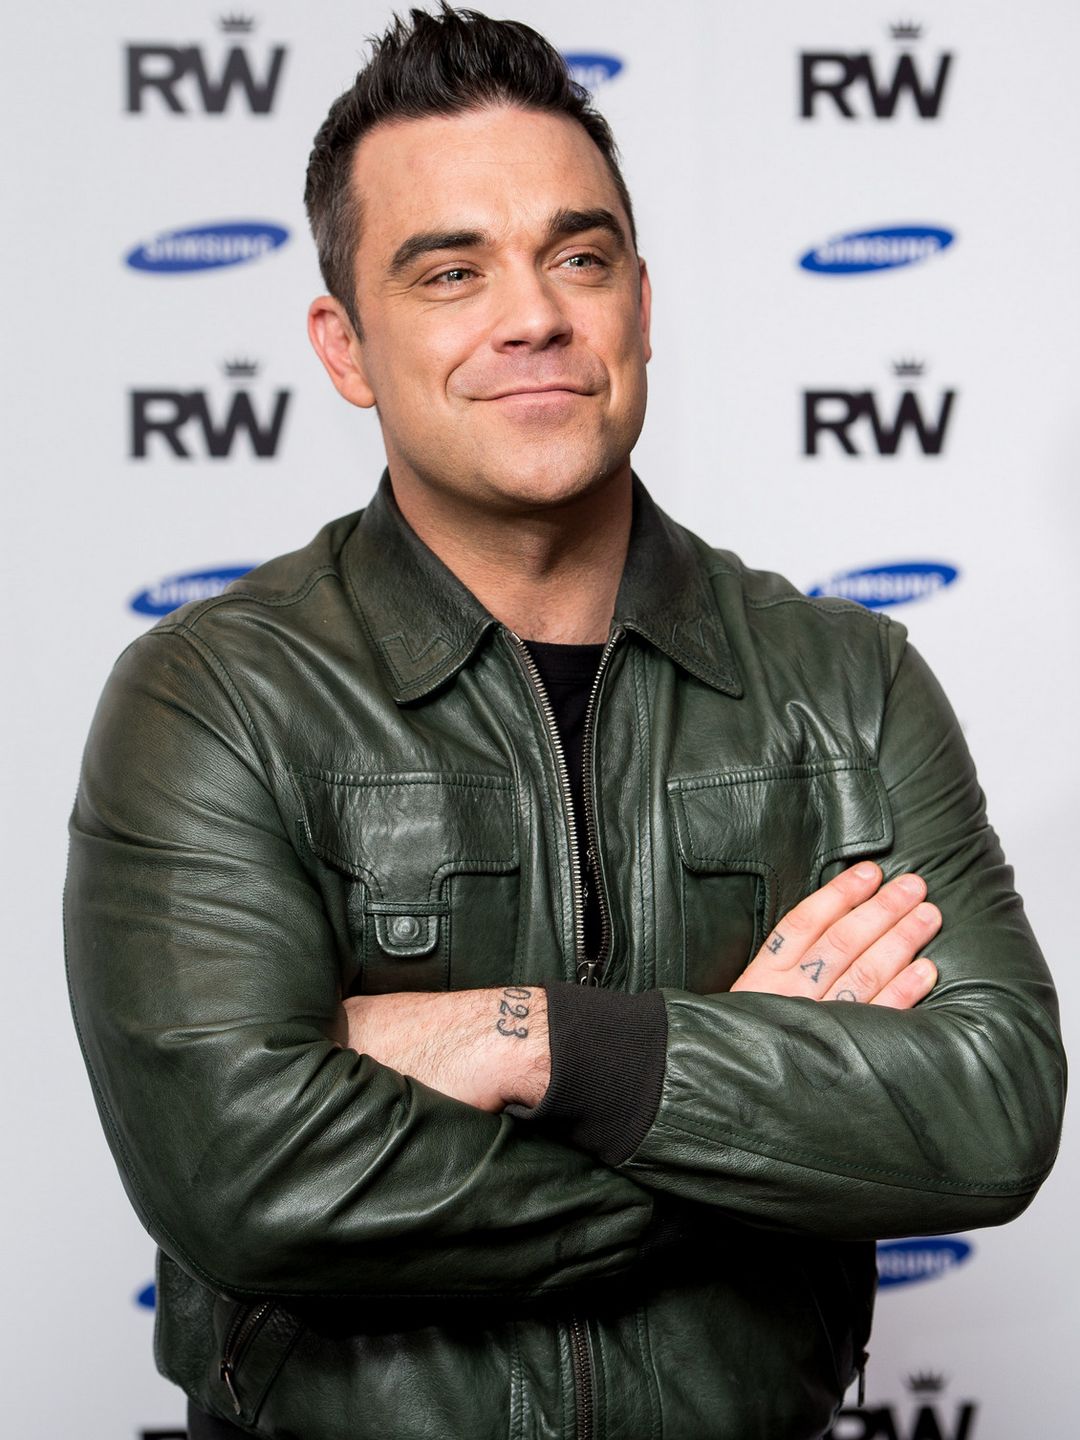 Robbie Williams how old is he